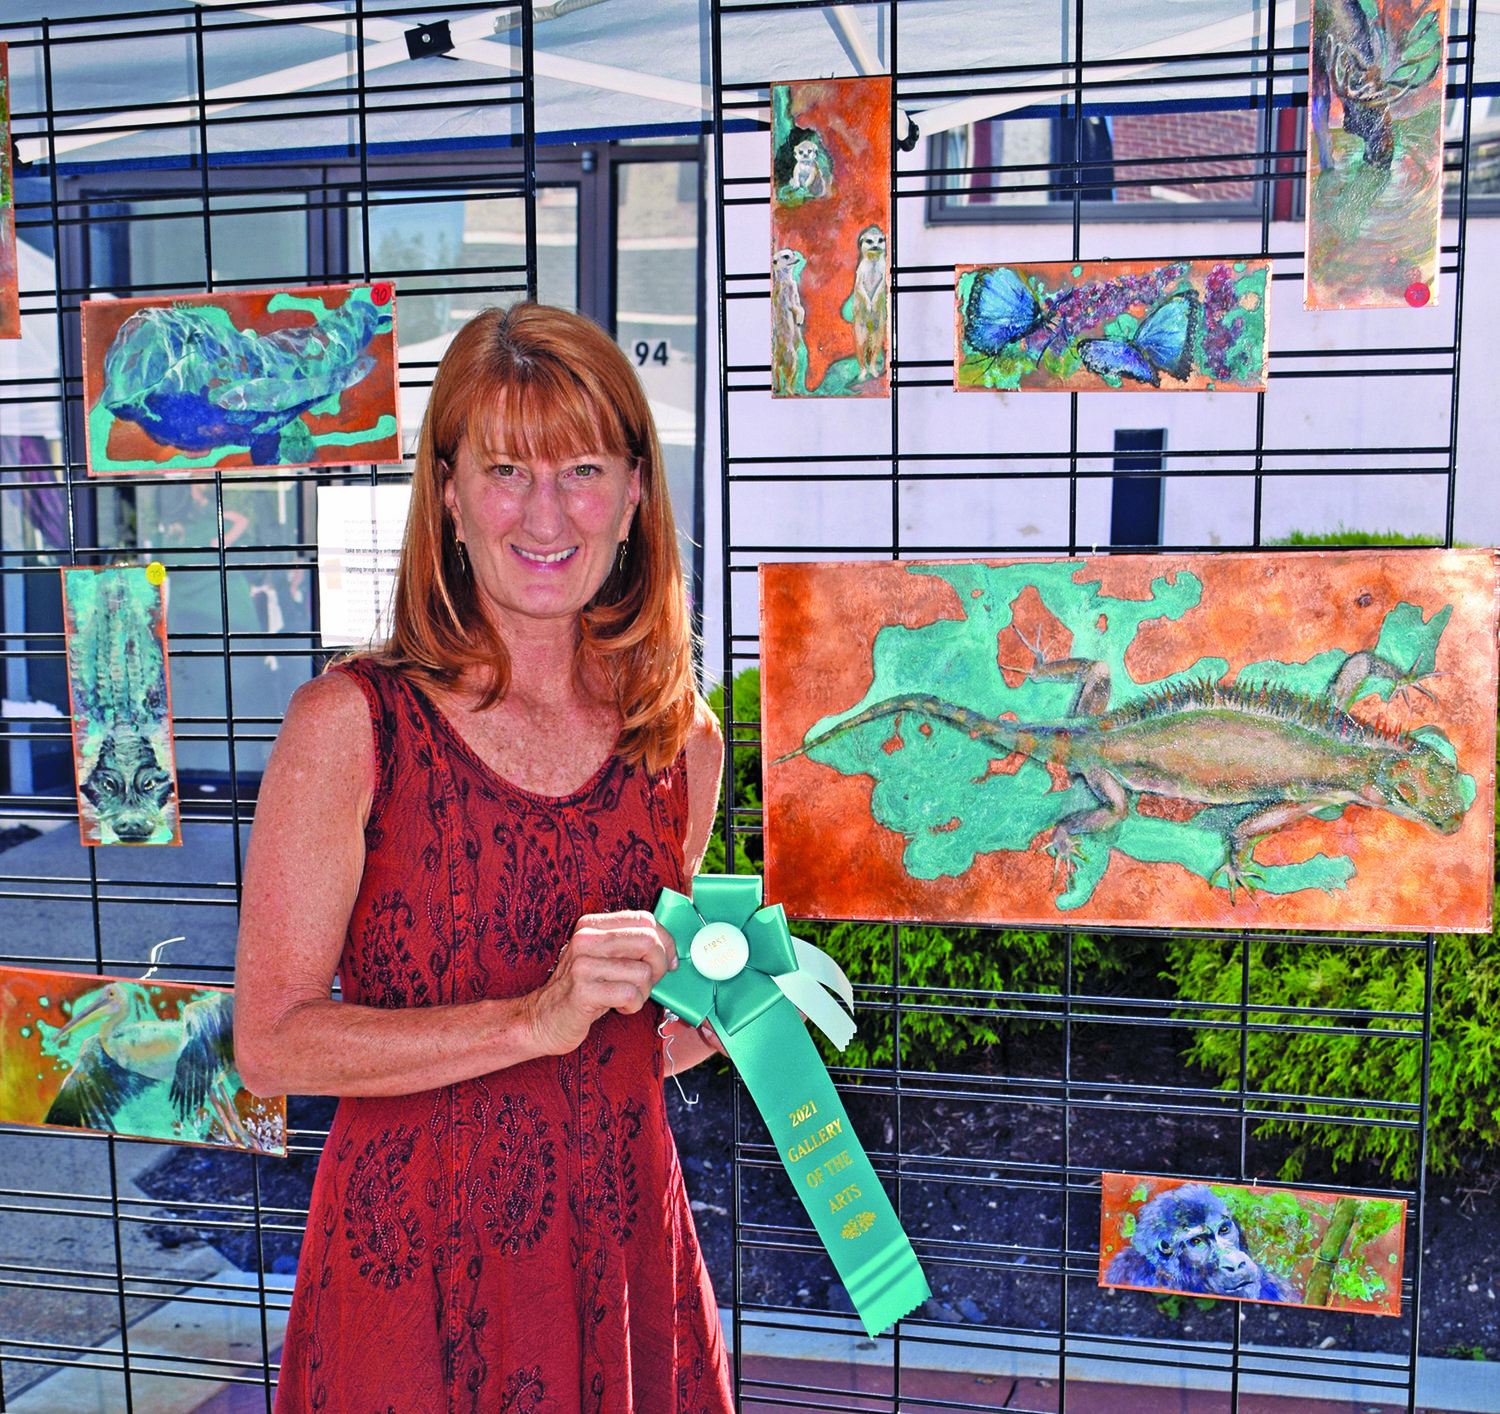 Sharon Finnegan won first place in the 2D/Non-Painting category.